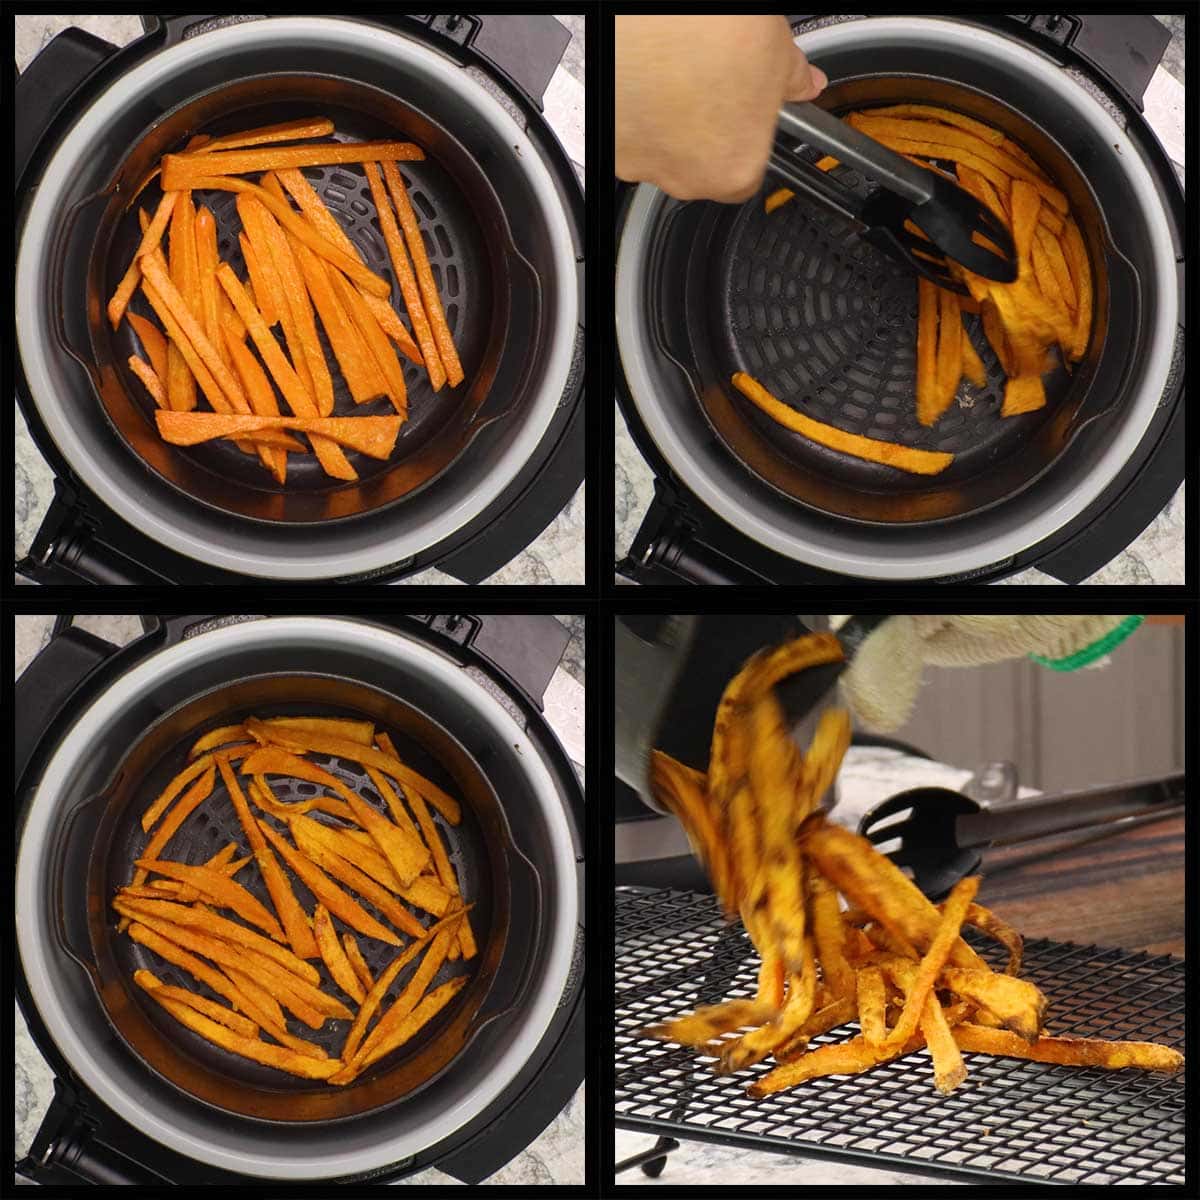 adding the first batch of air fryer sweet potatoes to the basket to air fry